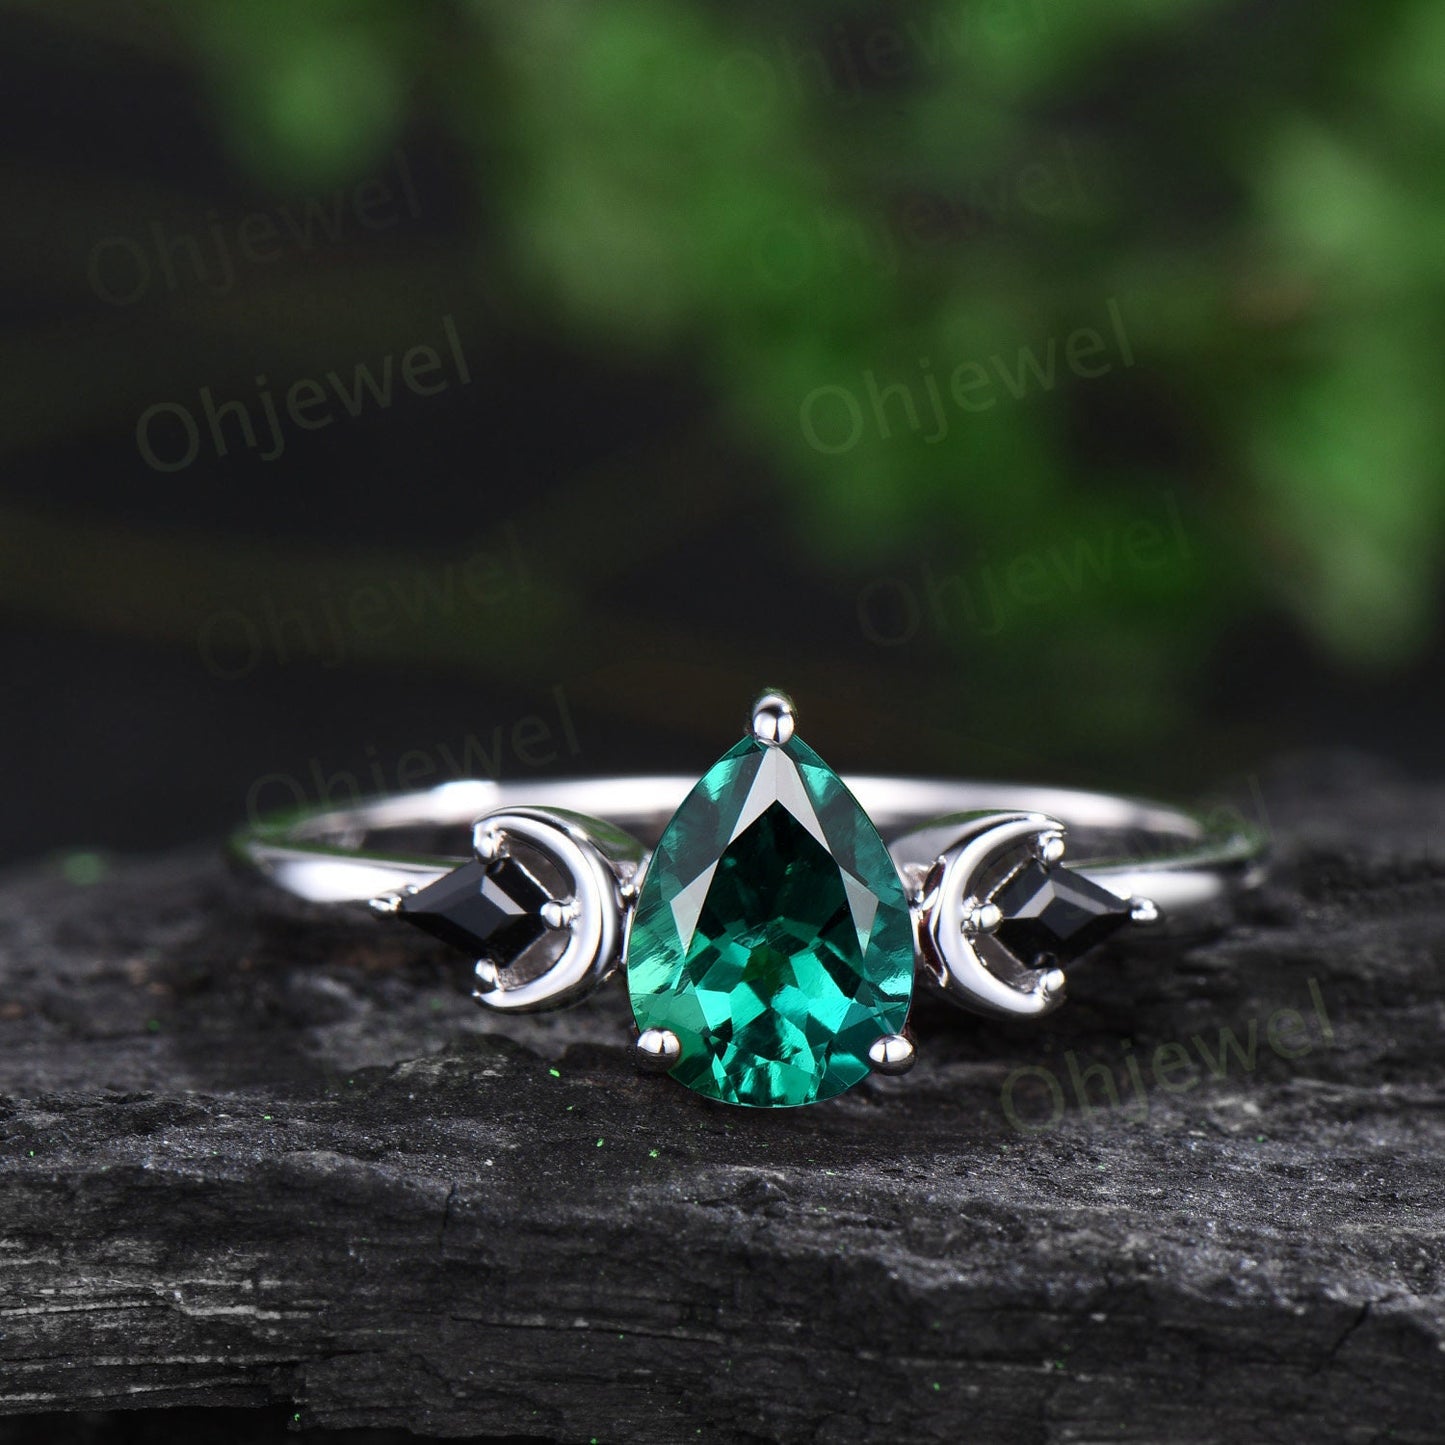 Unique pear shaped emerald engagement ring solid 14k white gold art deco moon ring set kite black spinel wedding bridal ring set women gift